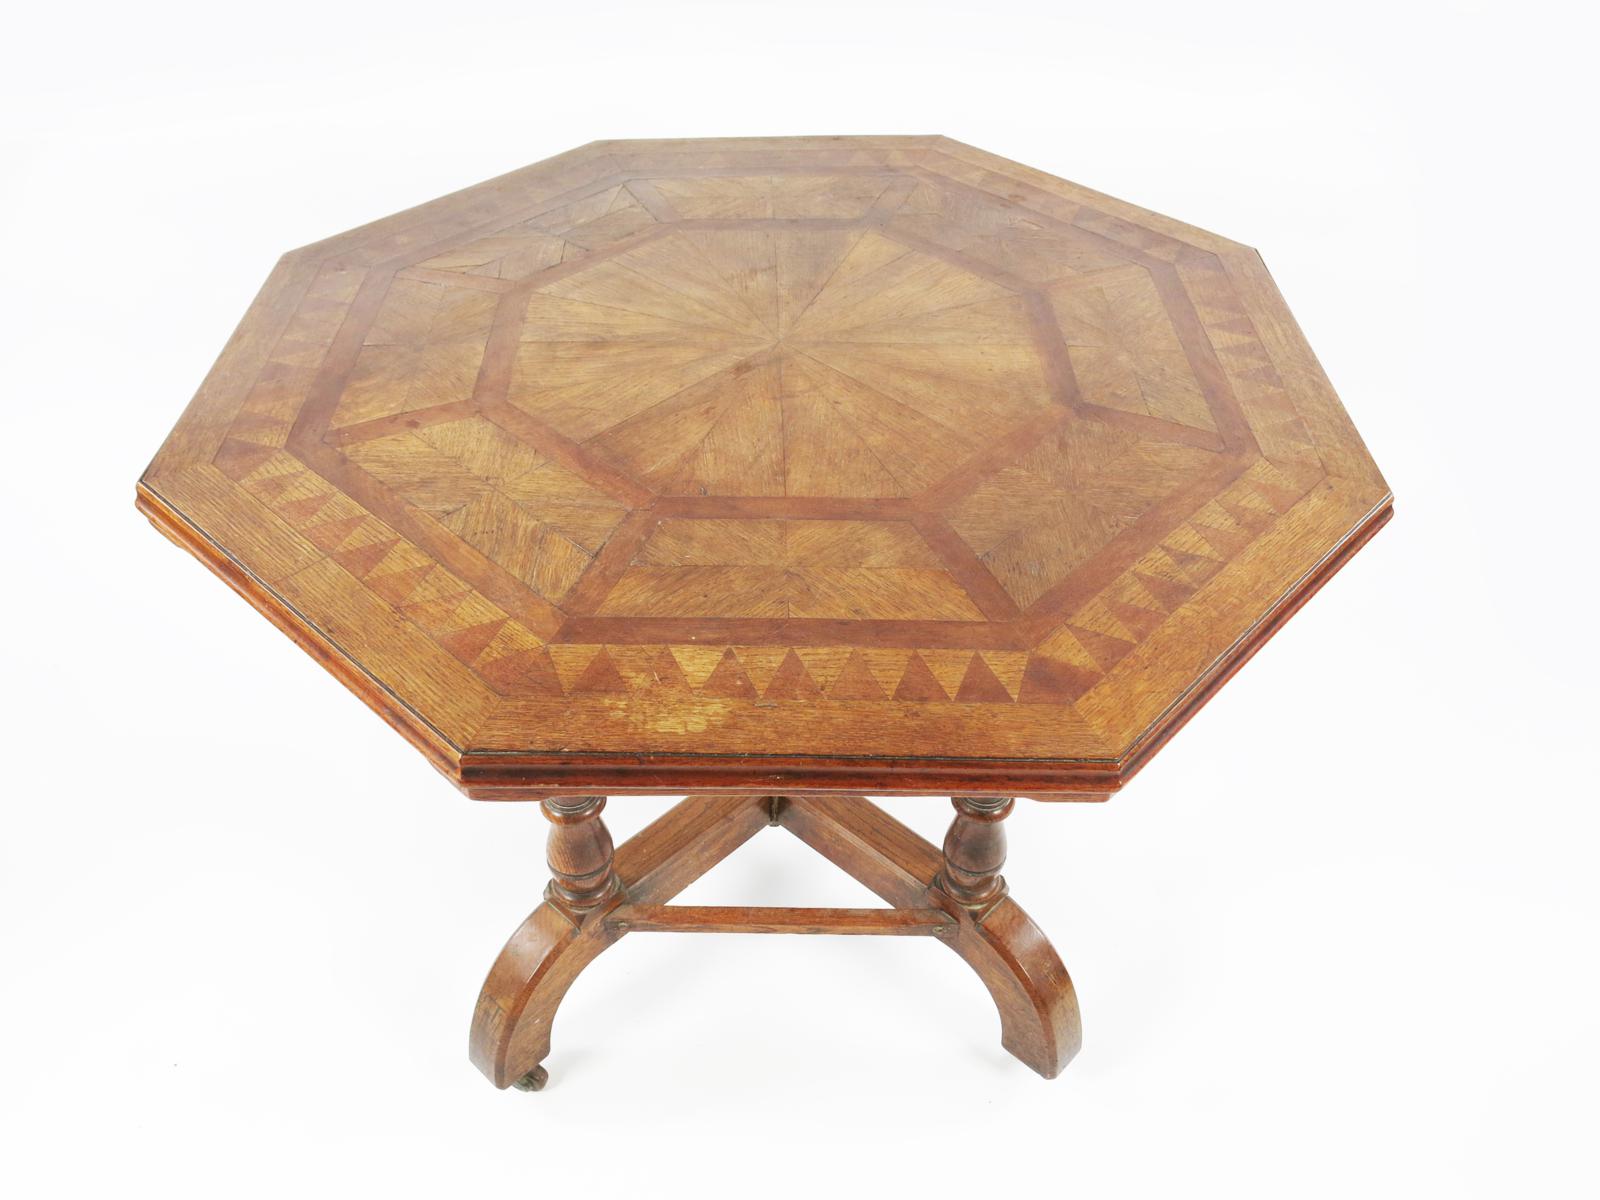 A Gothic Revival parquetry hall table the design attributed to Alfred Waterhouse, possibly